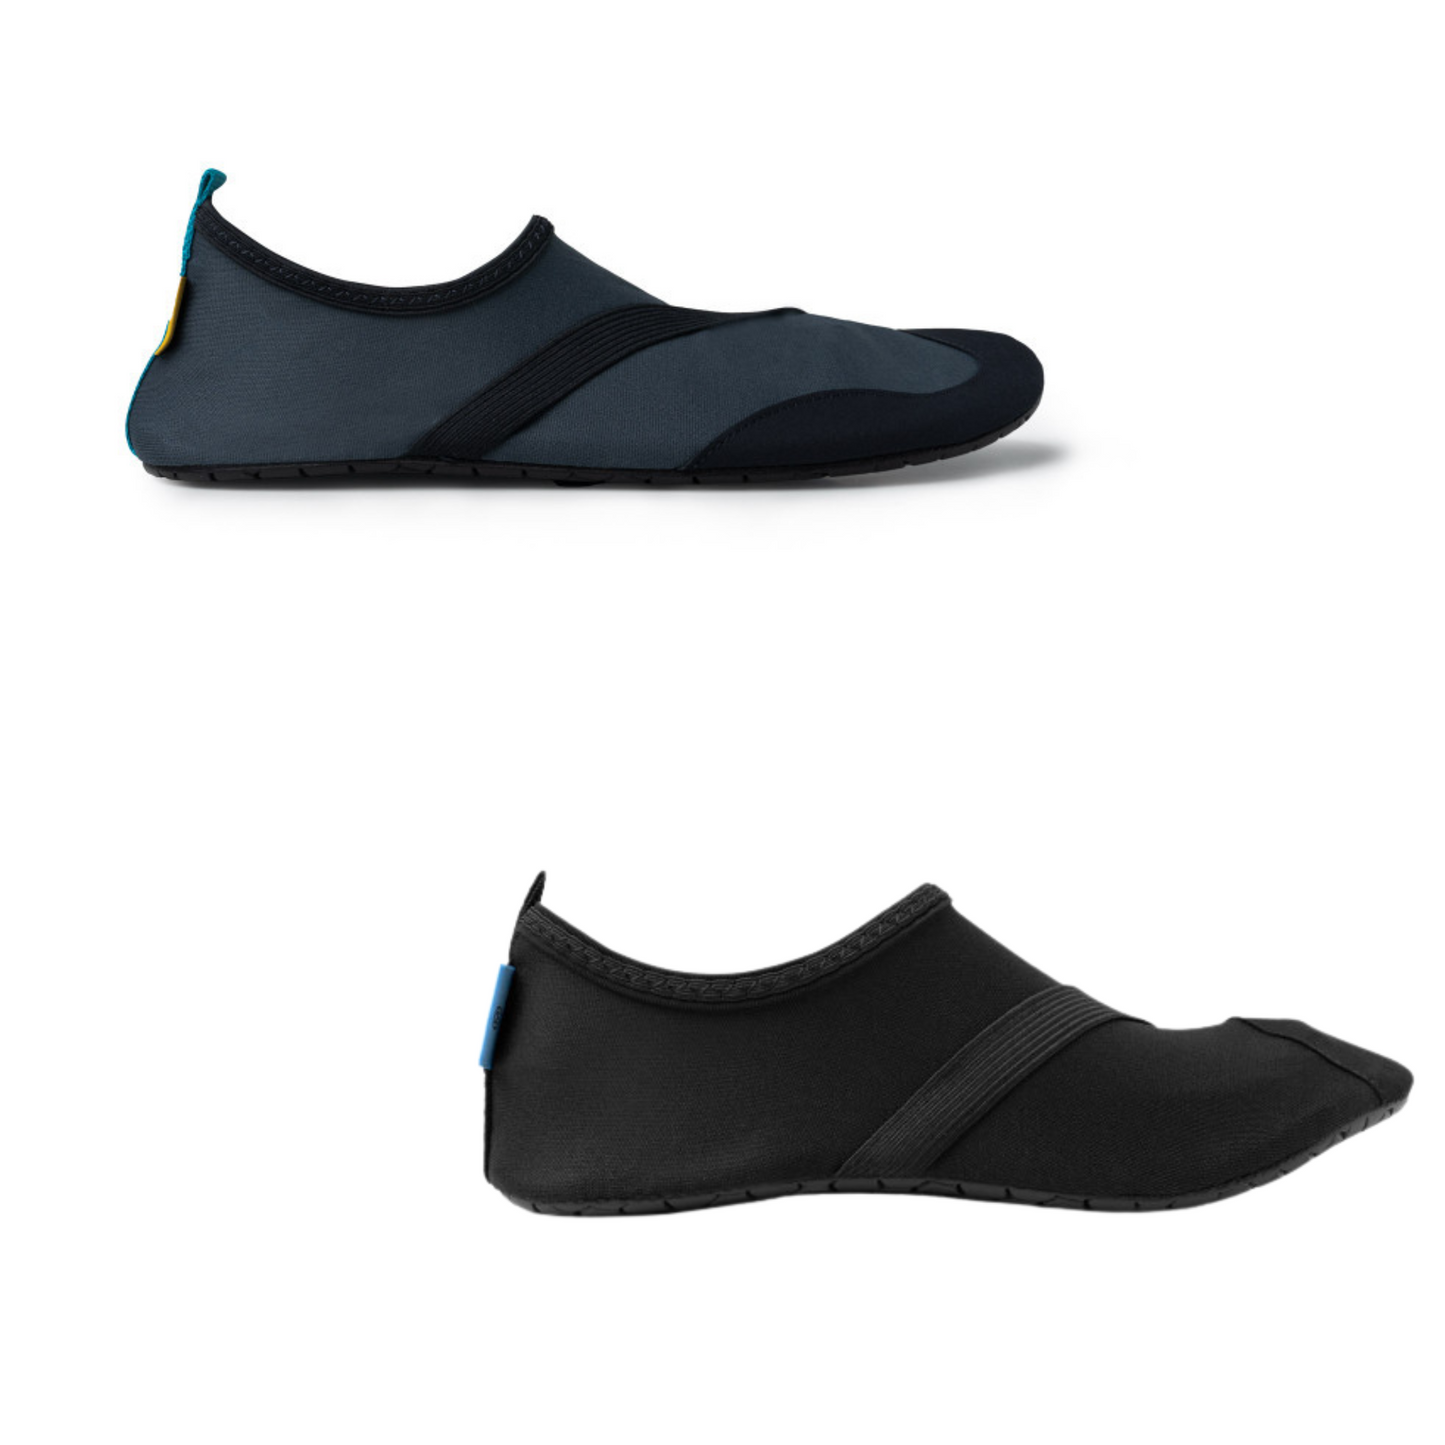 Breathable and flexible, FITKICKS are the lightweight water-friendly footwear for all the things you love to do. Quick-dry sport fabric and durable FlexForm™ soles naturally contour to the unique shape of your feet for a barefoot feeling with enough protection for everything from yoga, the beach and outdoor adventures to travel, commuting and everyday wear.  Take on any adventure in two neutral colorways with a matching grip strap and reinforced toe.